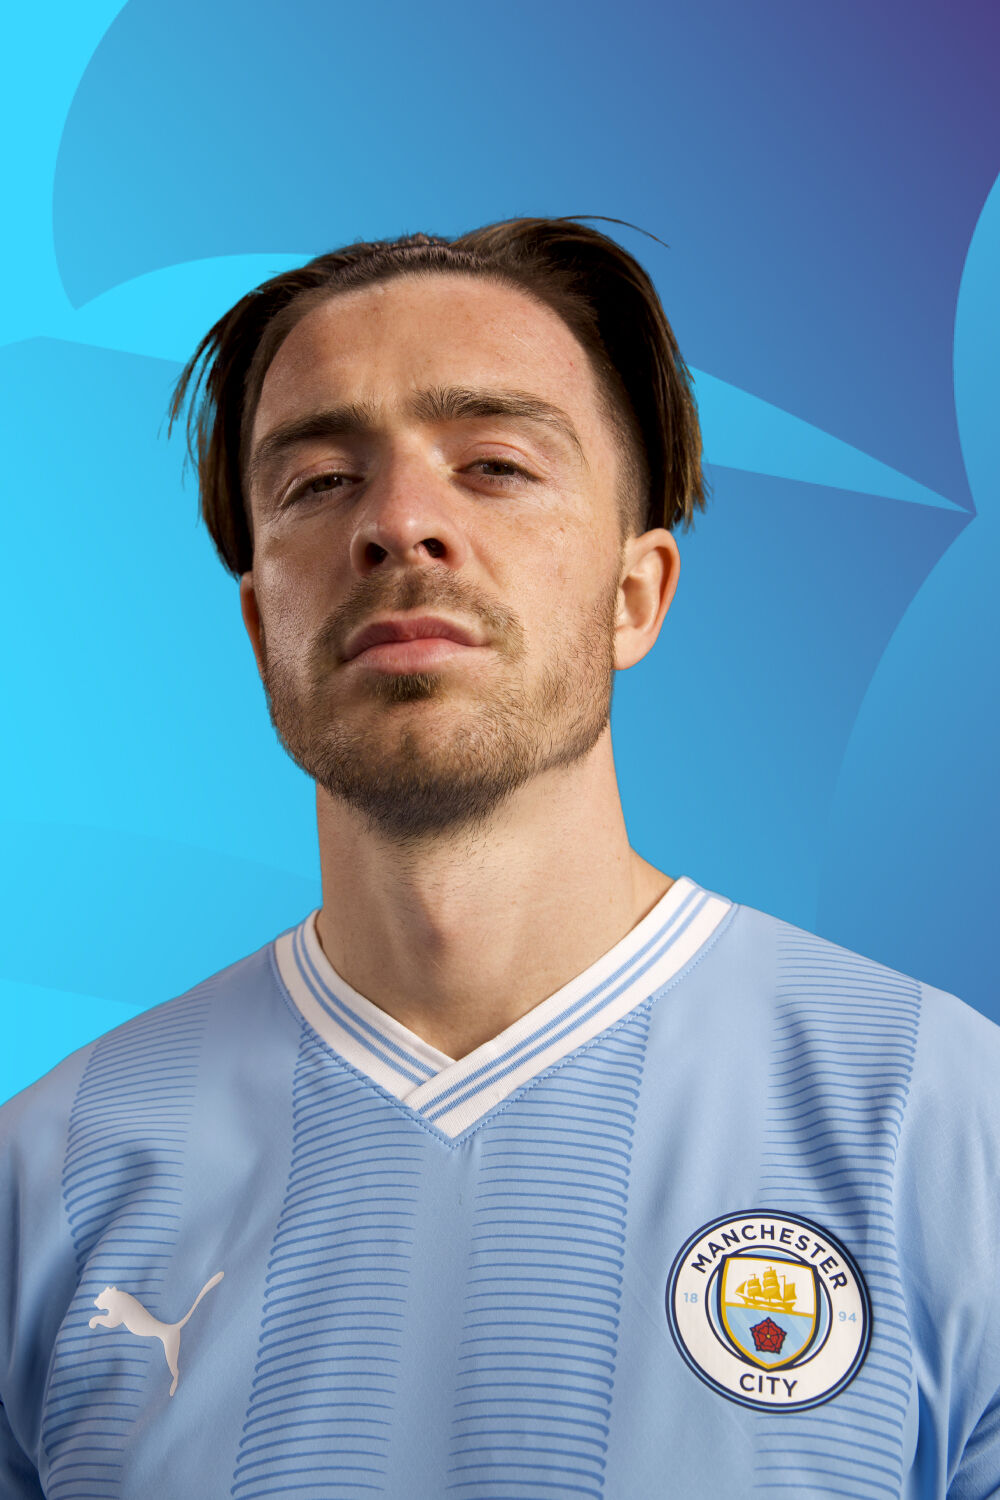 Manchester City | The Official Online Shop